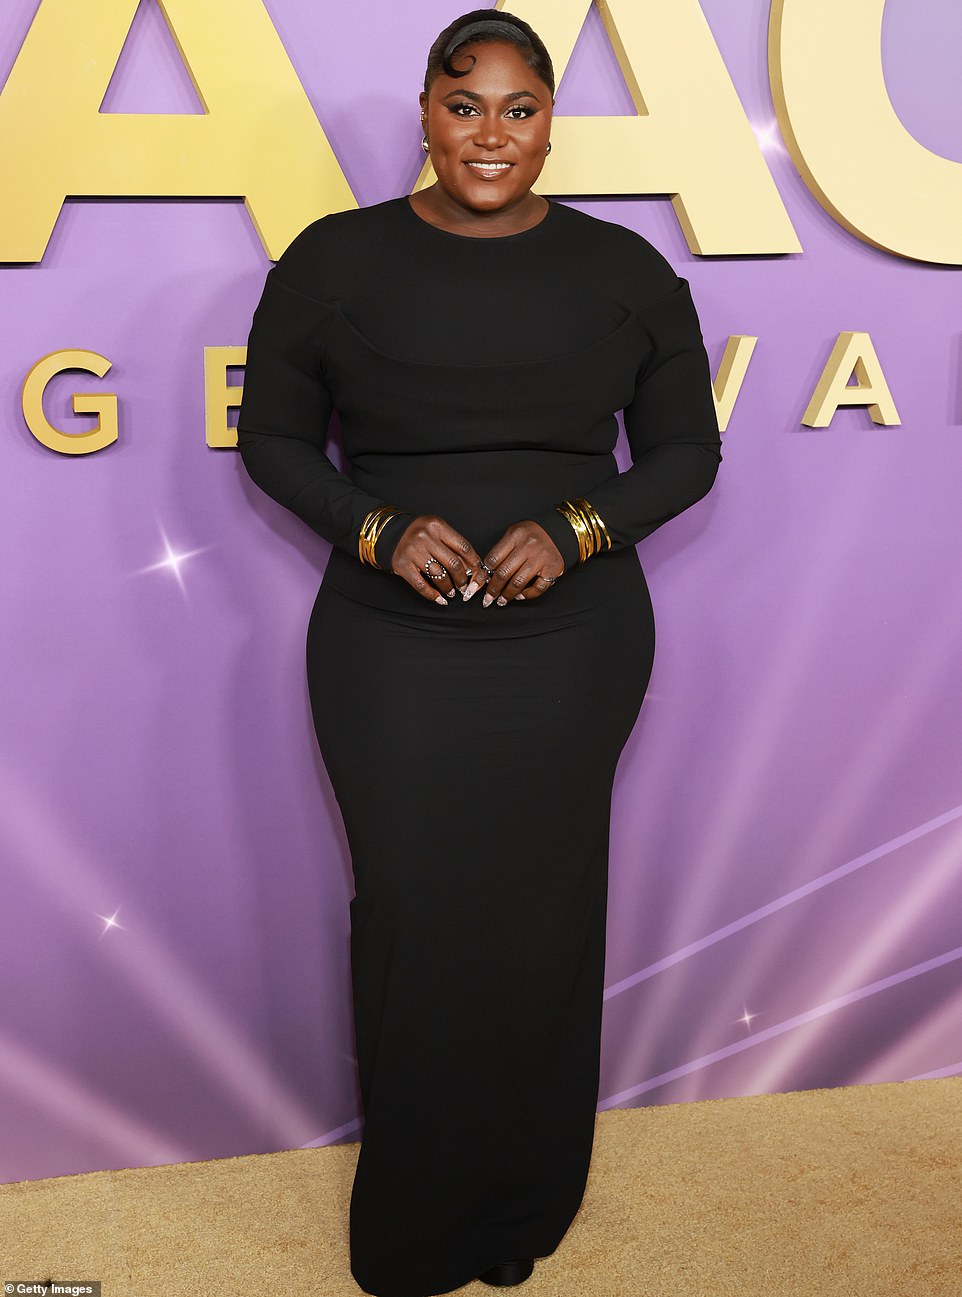 Danielle Brooks, who is also nominated for her turn in The Color Purple in a role she previously played on Broadway, modeled a simple floor-length black dress but added a splash of glitter with bangles